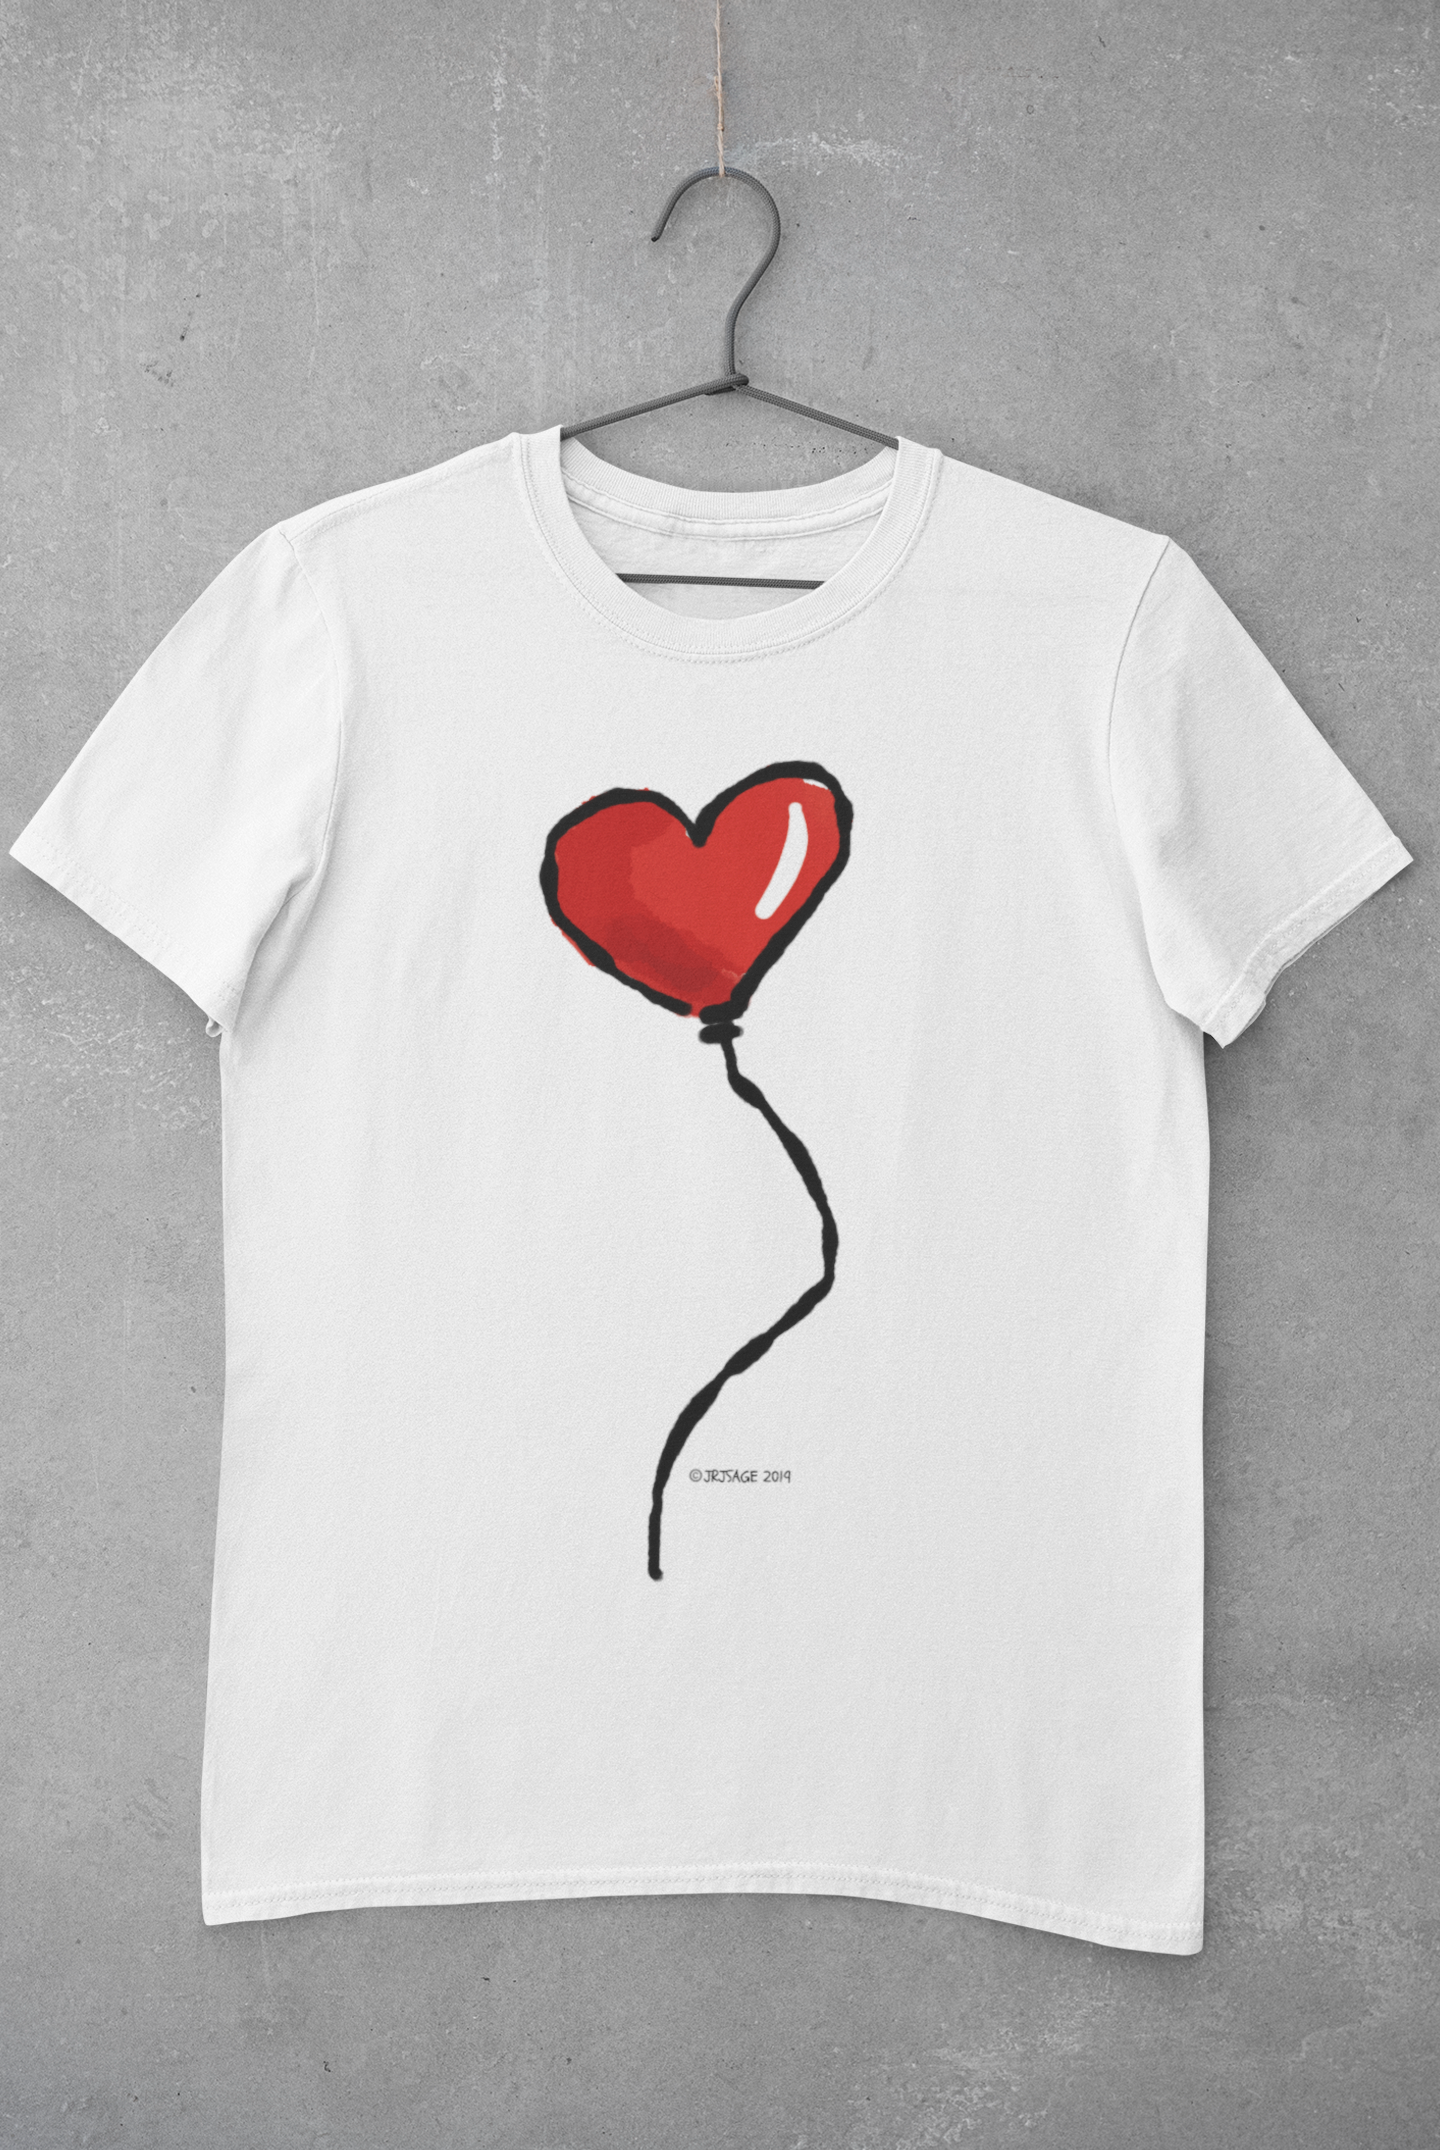 Red Heart Balloon I Love you T-shirt design illustration printed on a white vegan cotton t-shirt by Hector and Bone